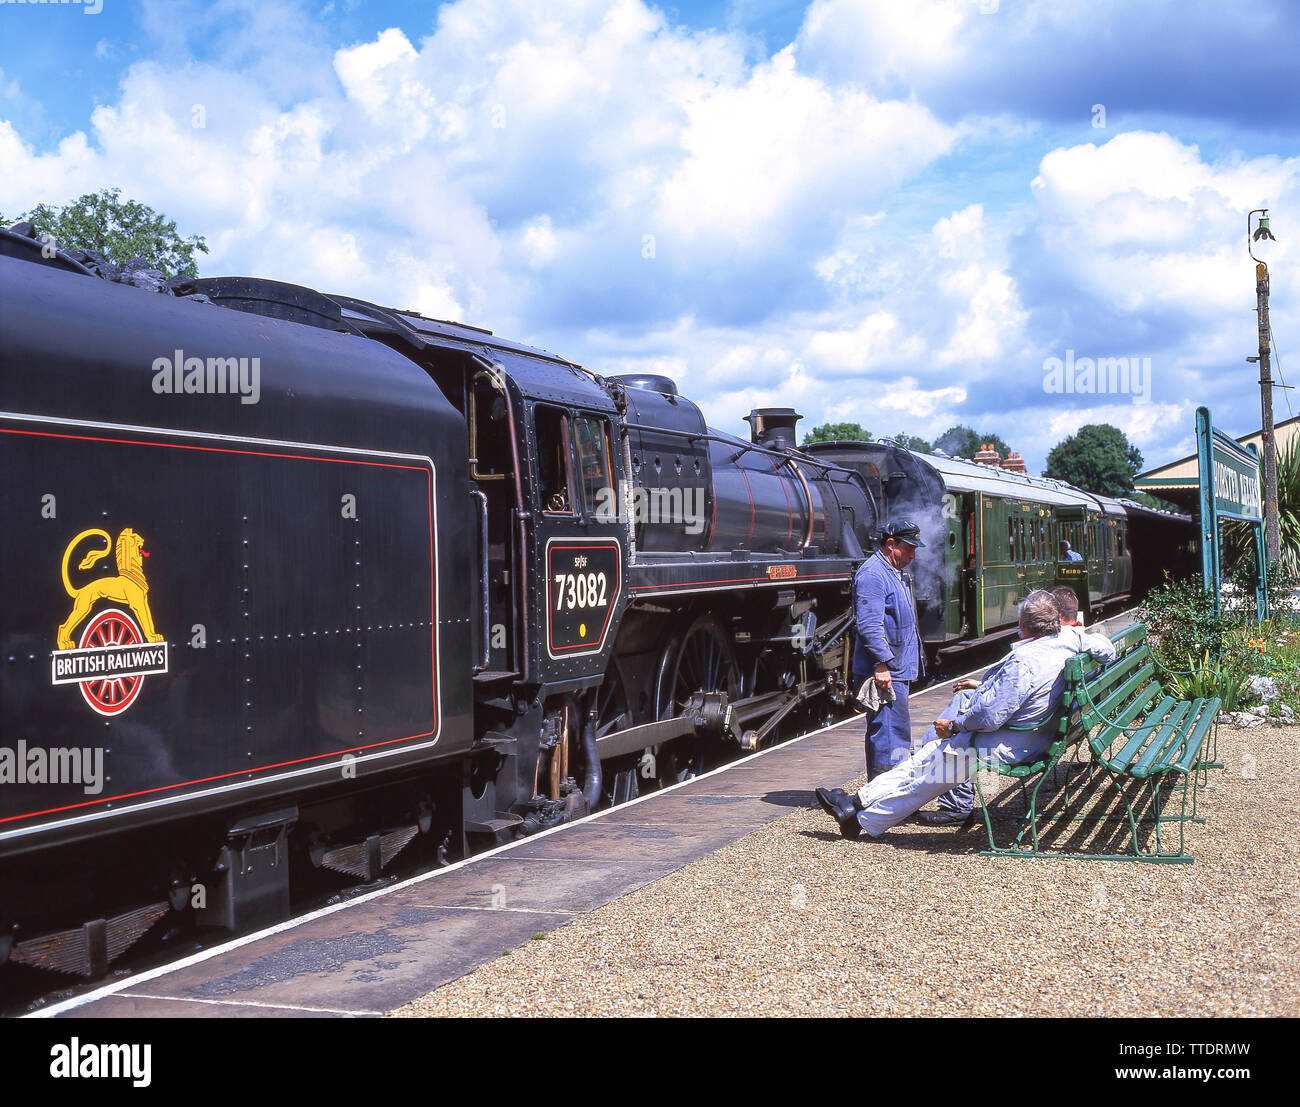 Les Bluebell Railway Station, Horsted Keynes, West Sussex, Angleterre, Royaume-Uni Banque D'Images